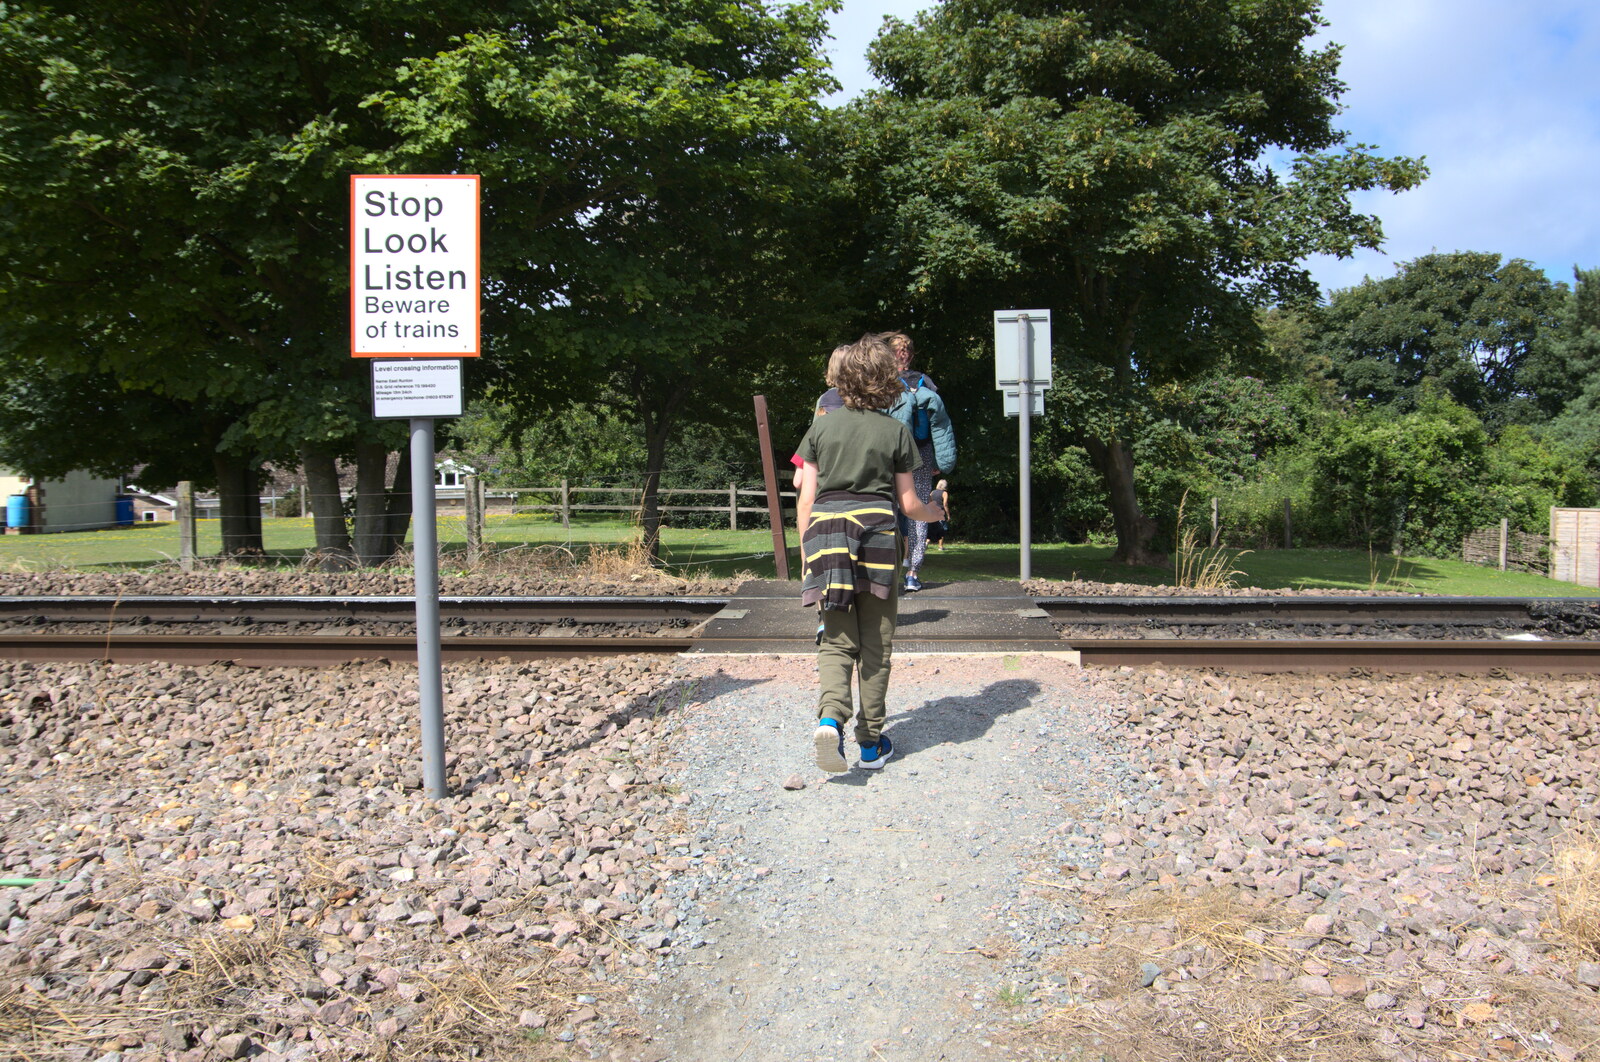 Crossing the railway line from Camping on the Coast, East Runton, North Norfolk - 25th July 2020